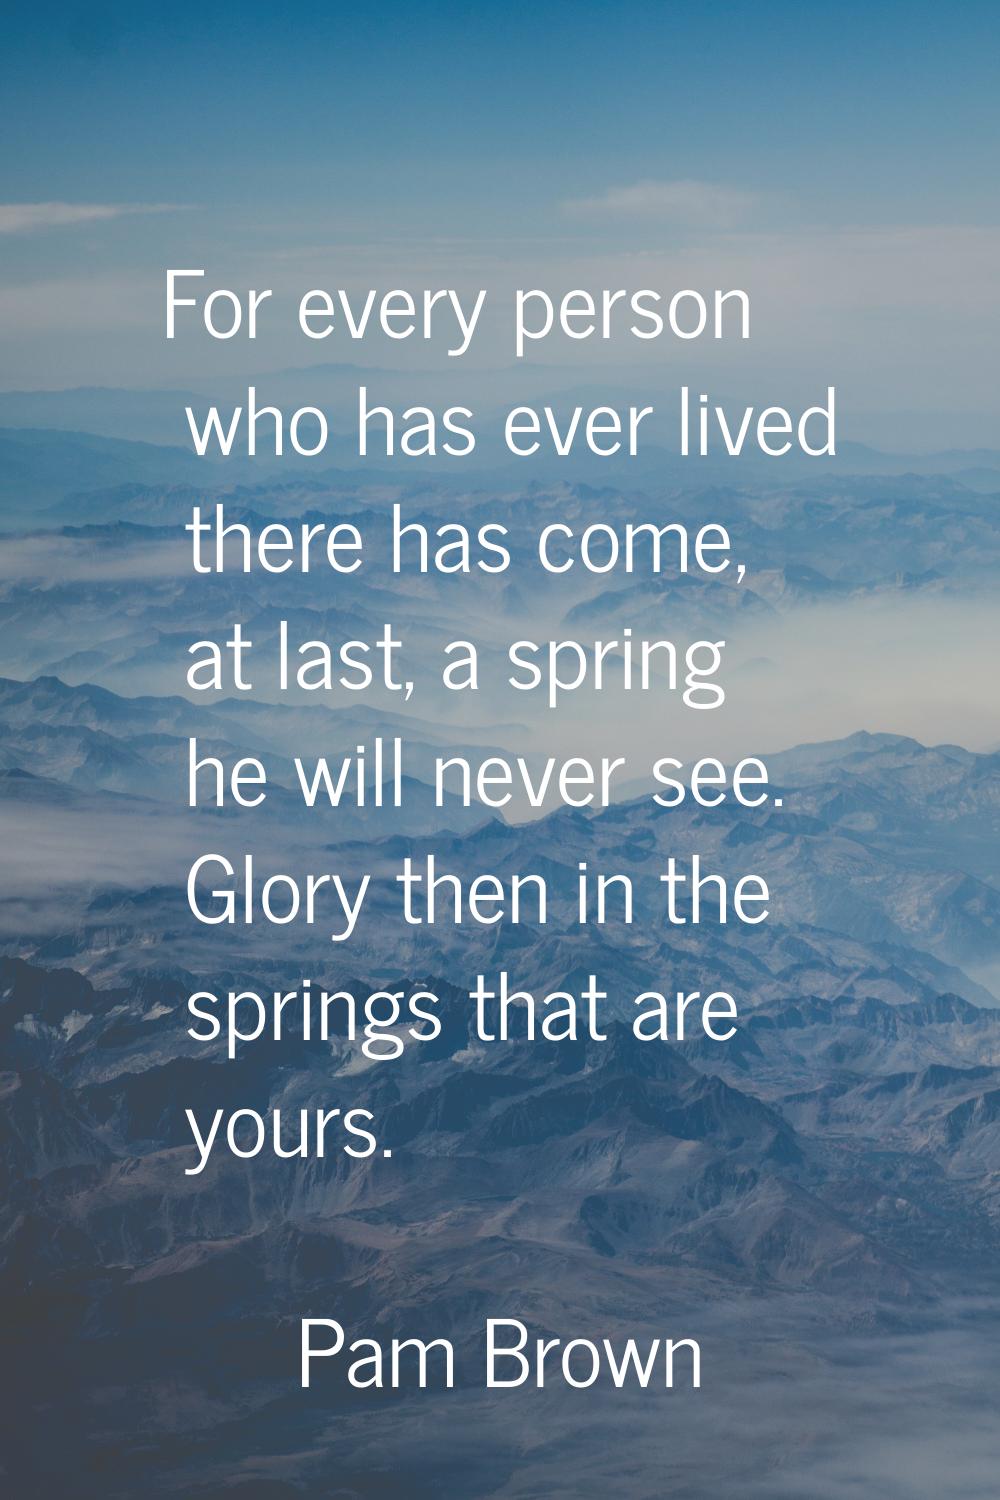 For every person who has ever lived there has come, at last, a spring he will never see. Glory then